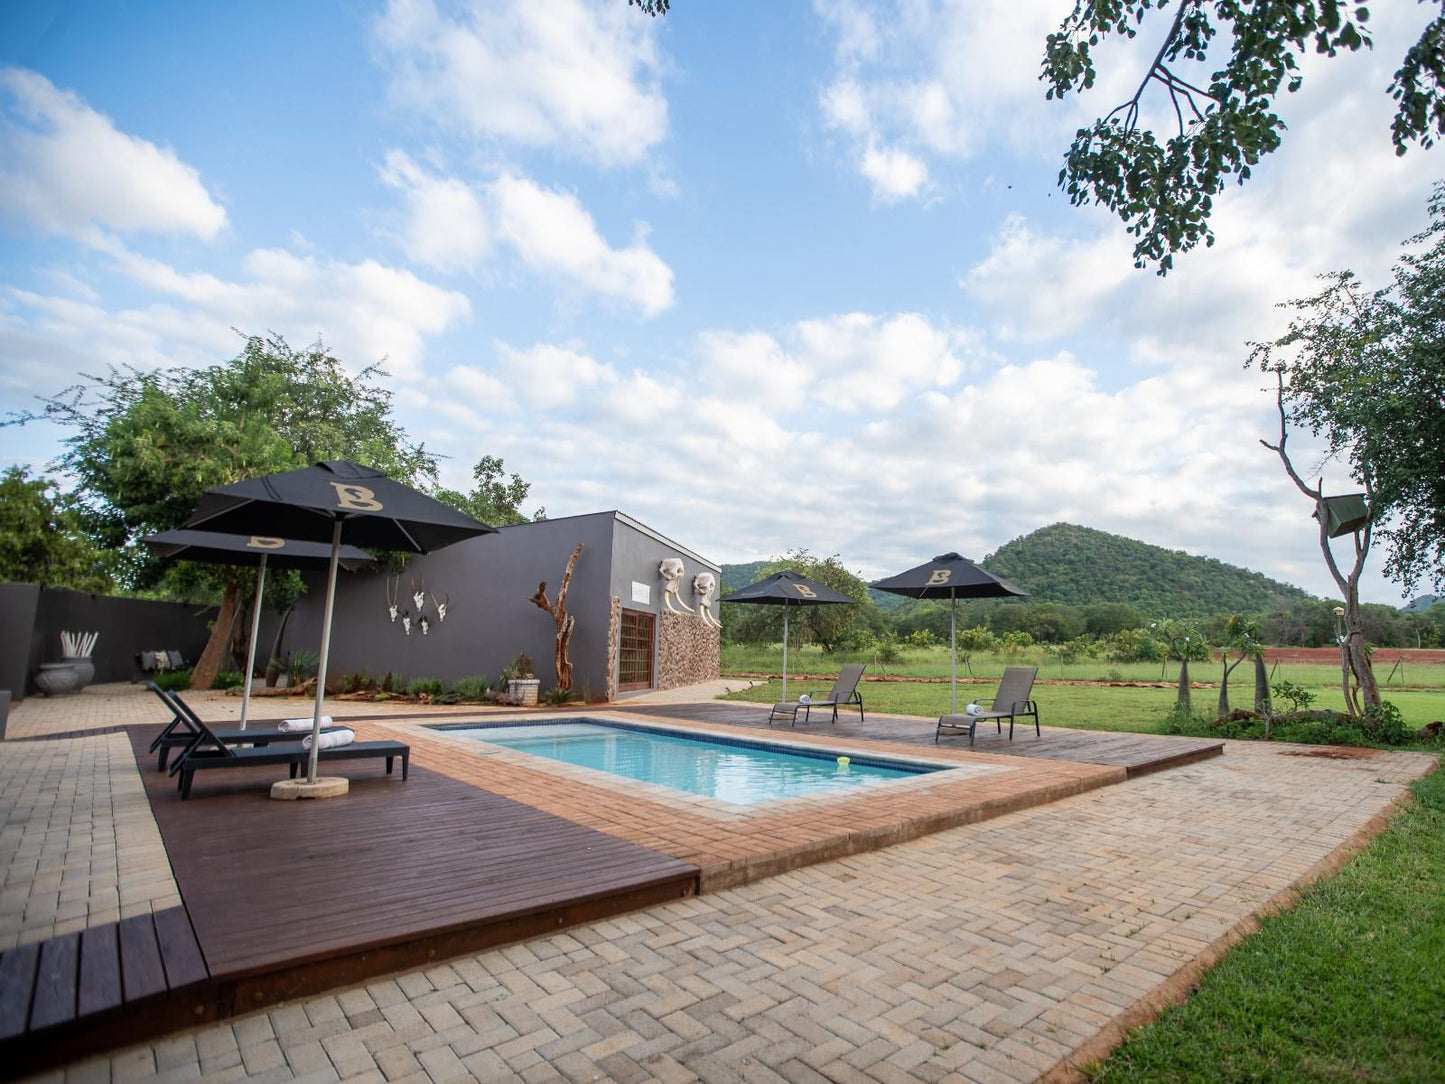 Kilima Private Game Reserve And Spa Gravelotte Limpopo Province South Africa Swimming Pool